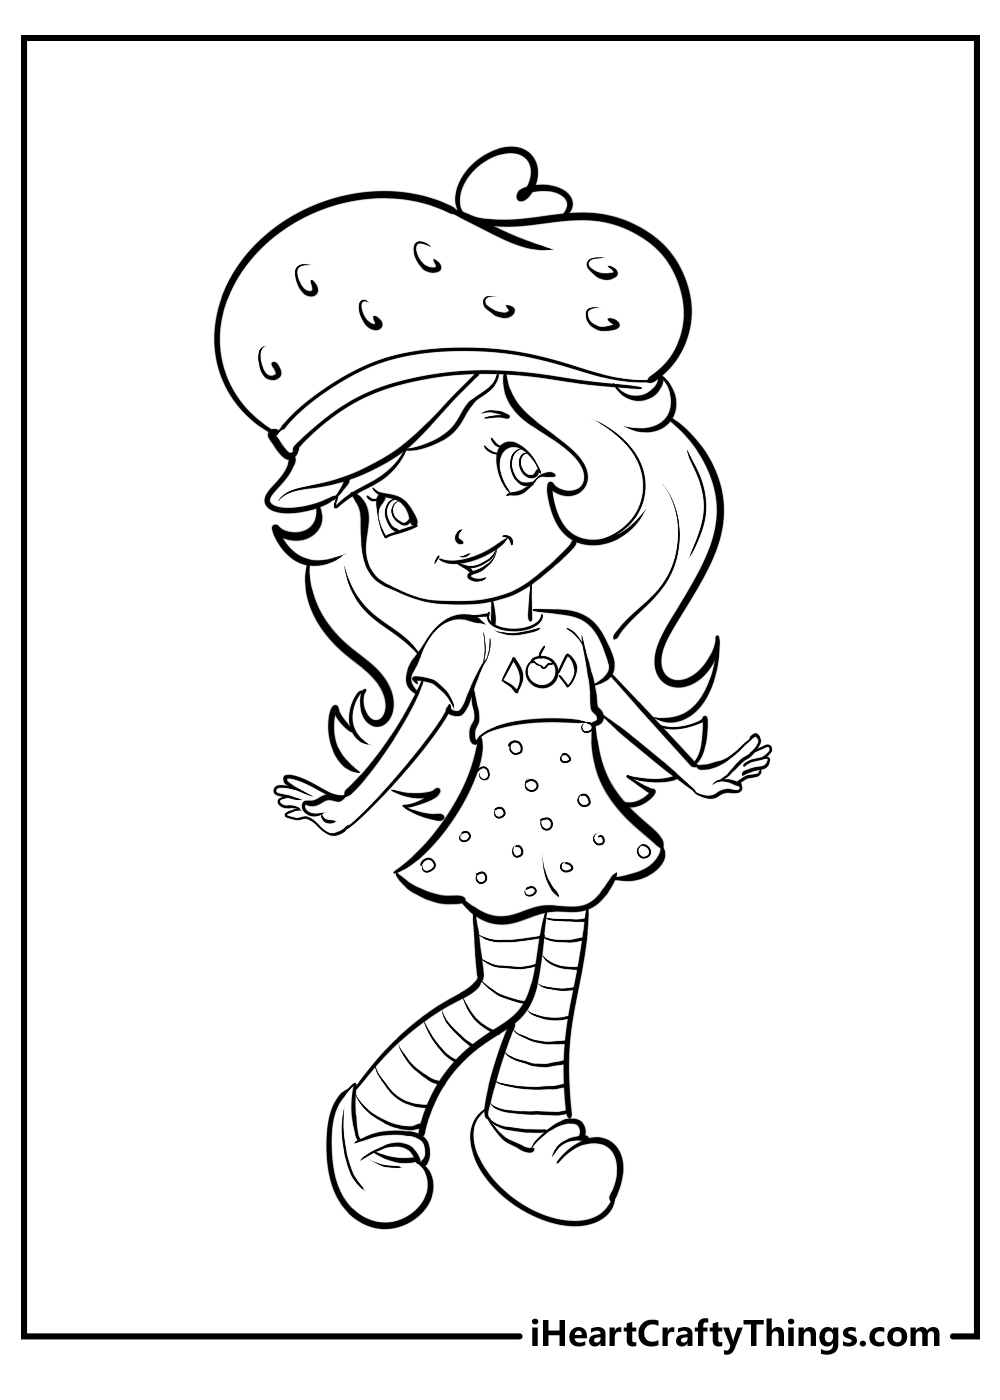 Black-and-White Strawberry Shortcake Coloring Printable